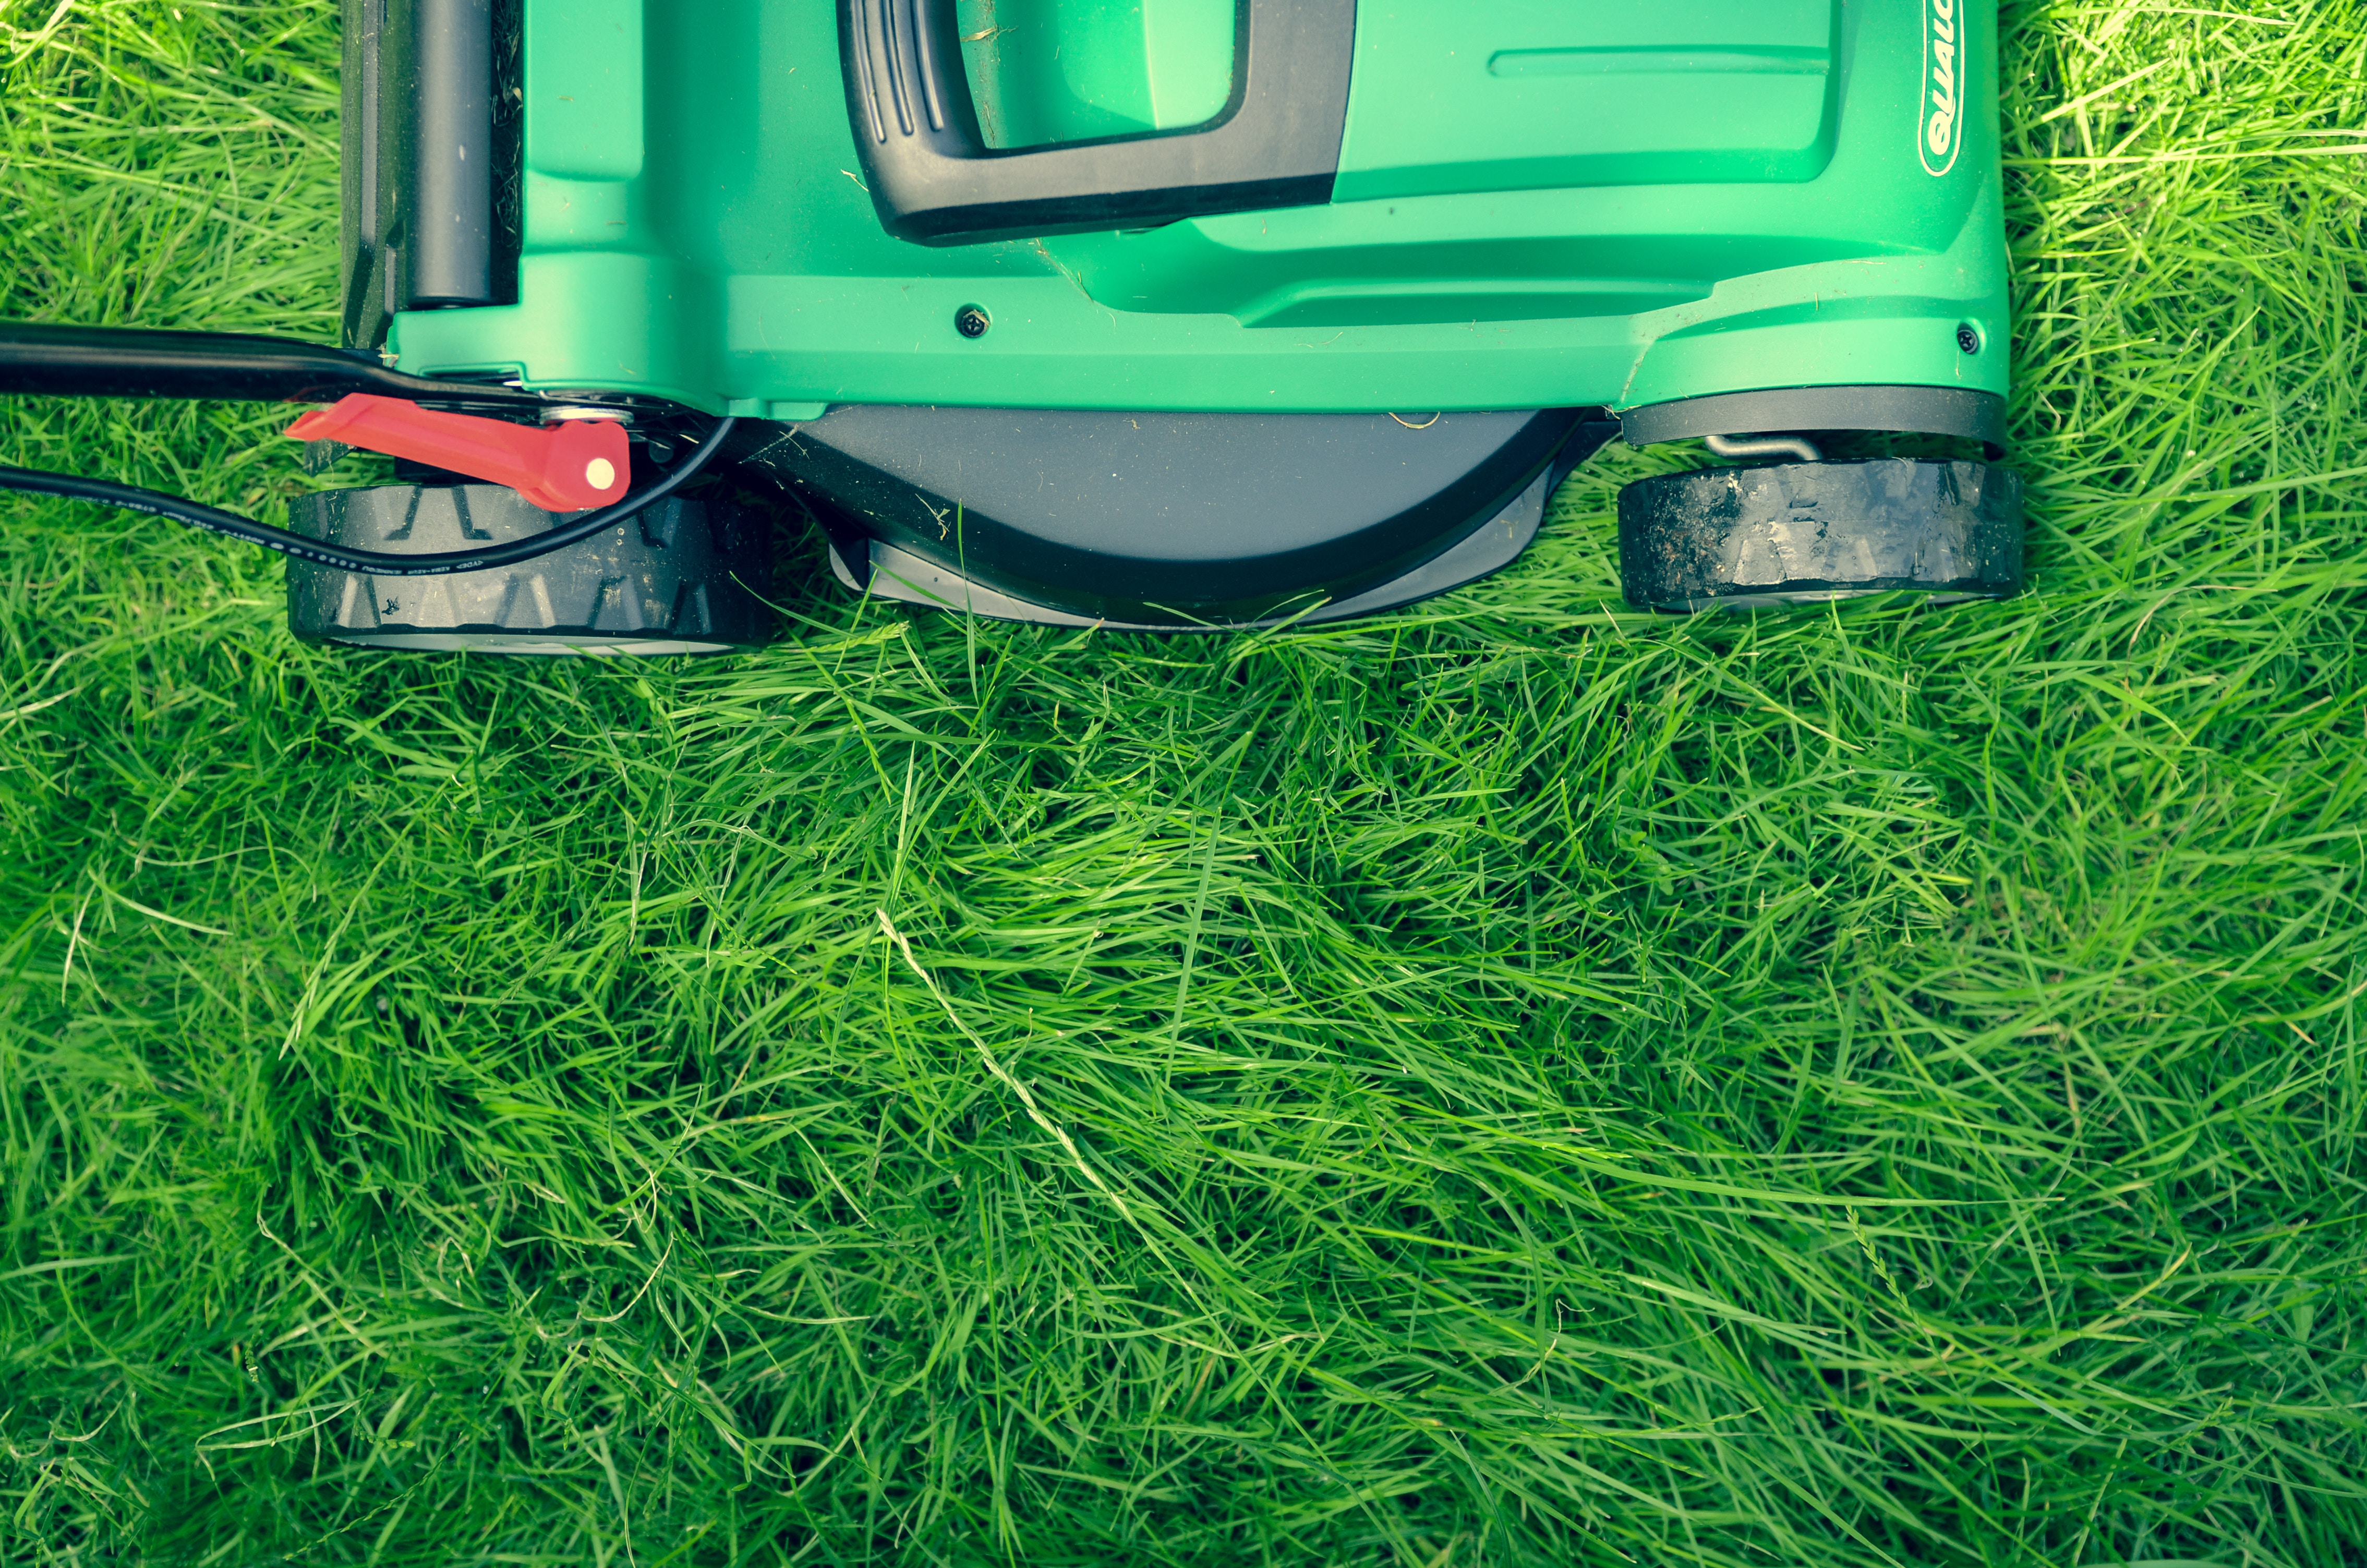 Professional Residential and commercial lawn mowing in Northwest Ohio area